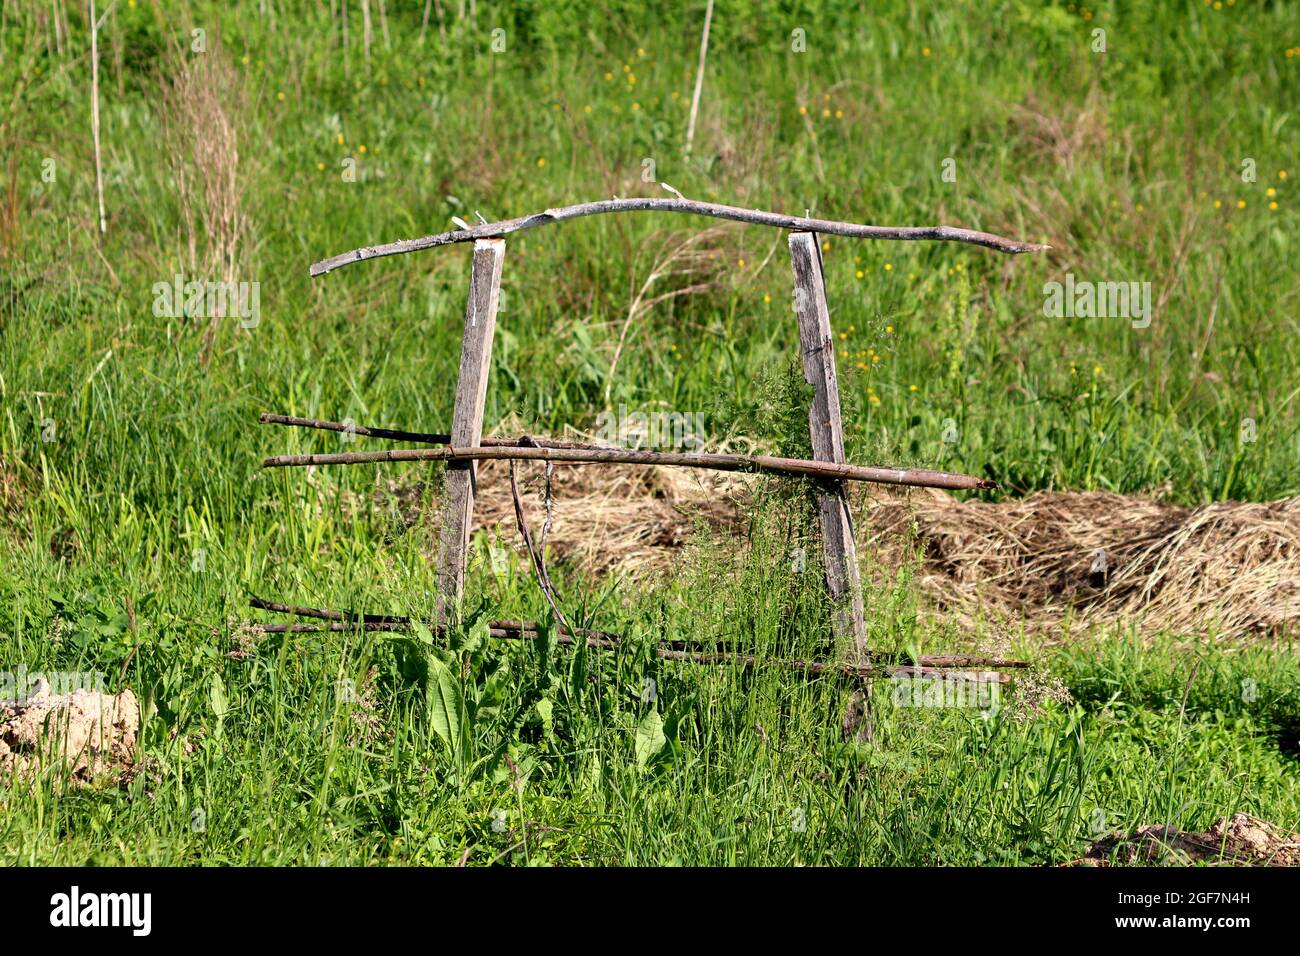 Abandoned urban home garden homemade makeshift small old wooden support frame made of dry wooden boards and sticks used as support for planted trees Stock Photo